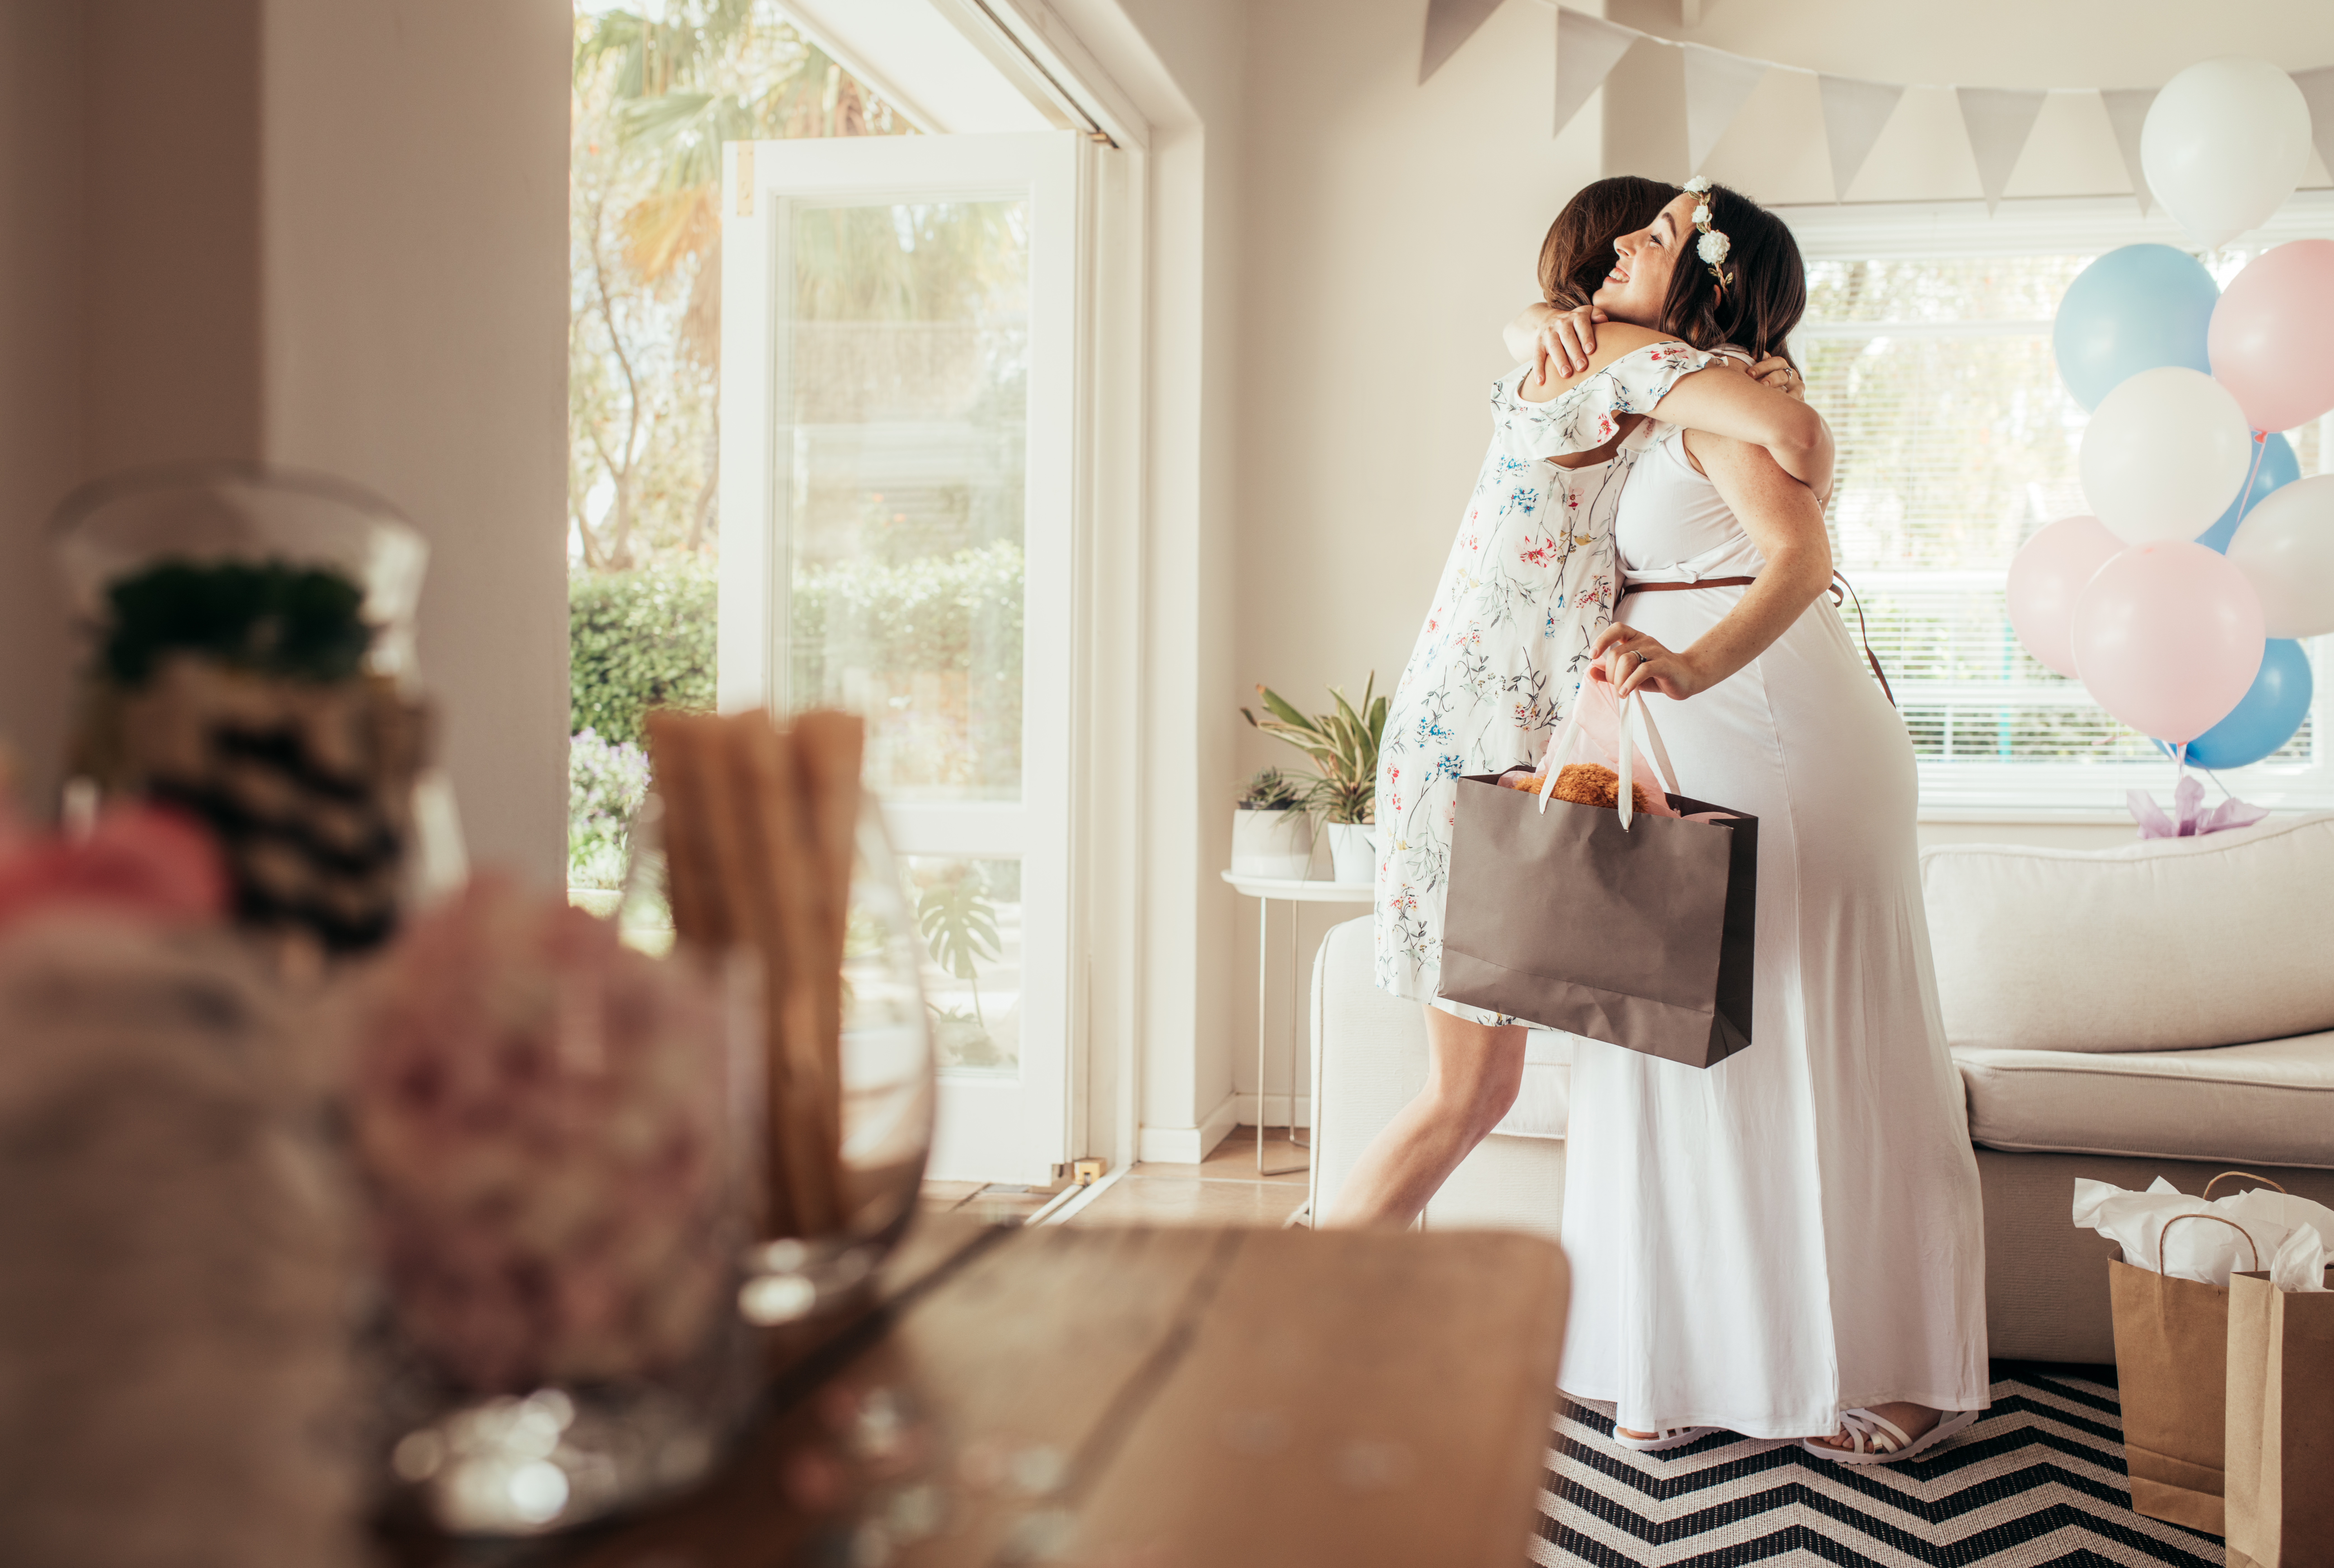 Someone hugging a pregnant woman at a baby shower | Source: Shutterstock